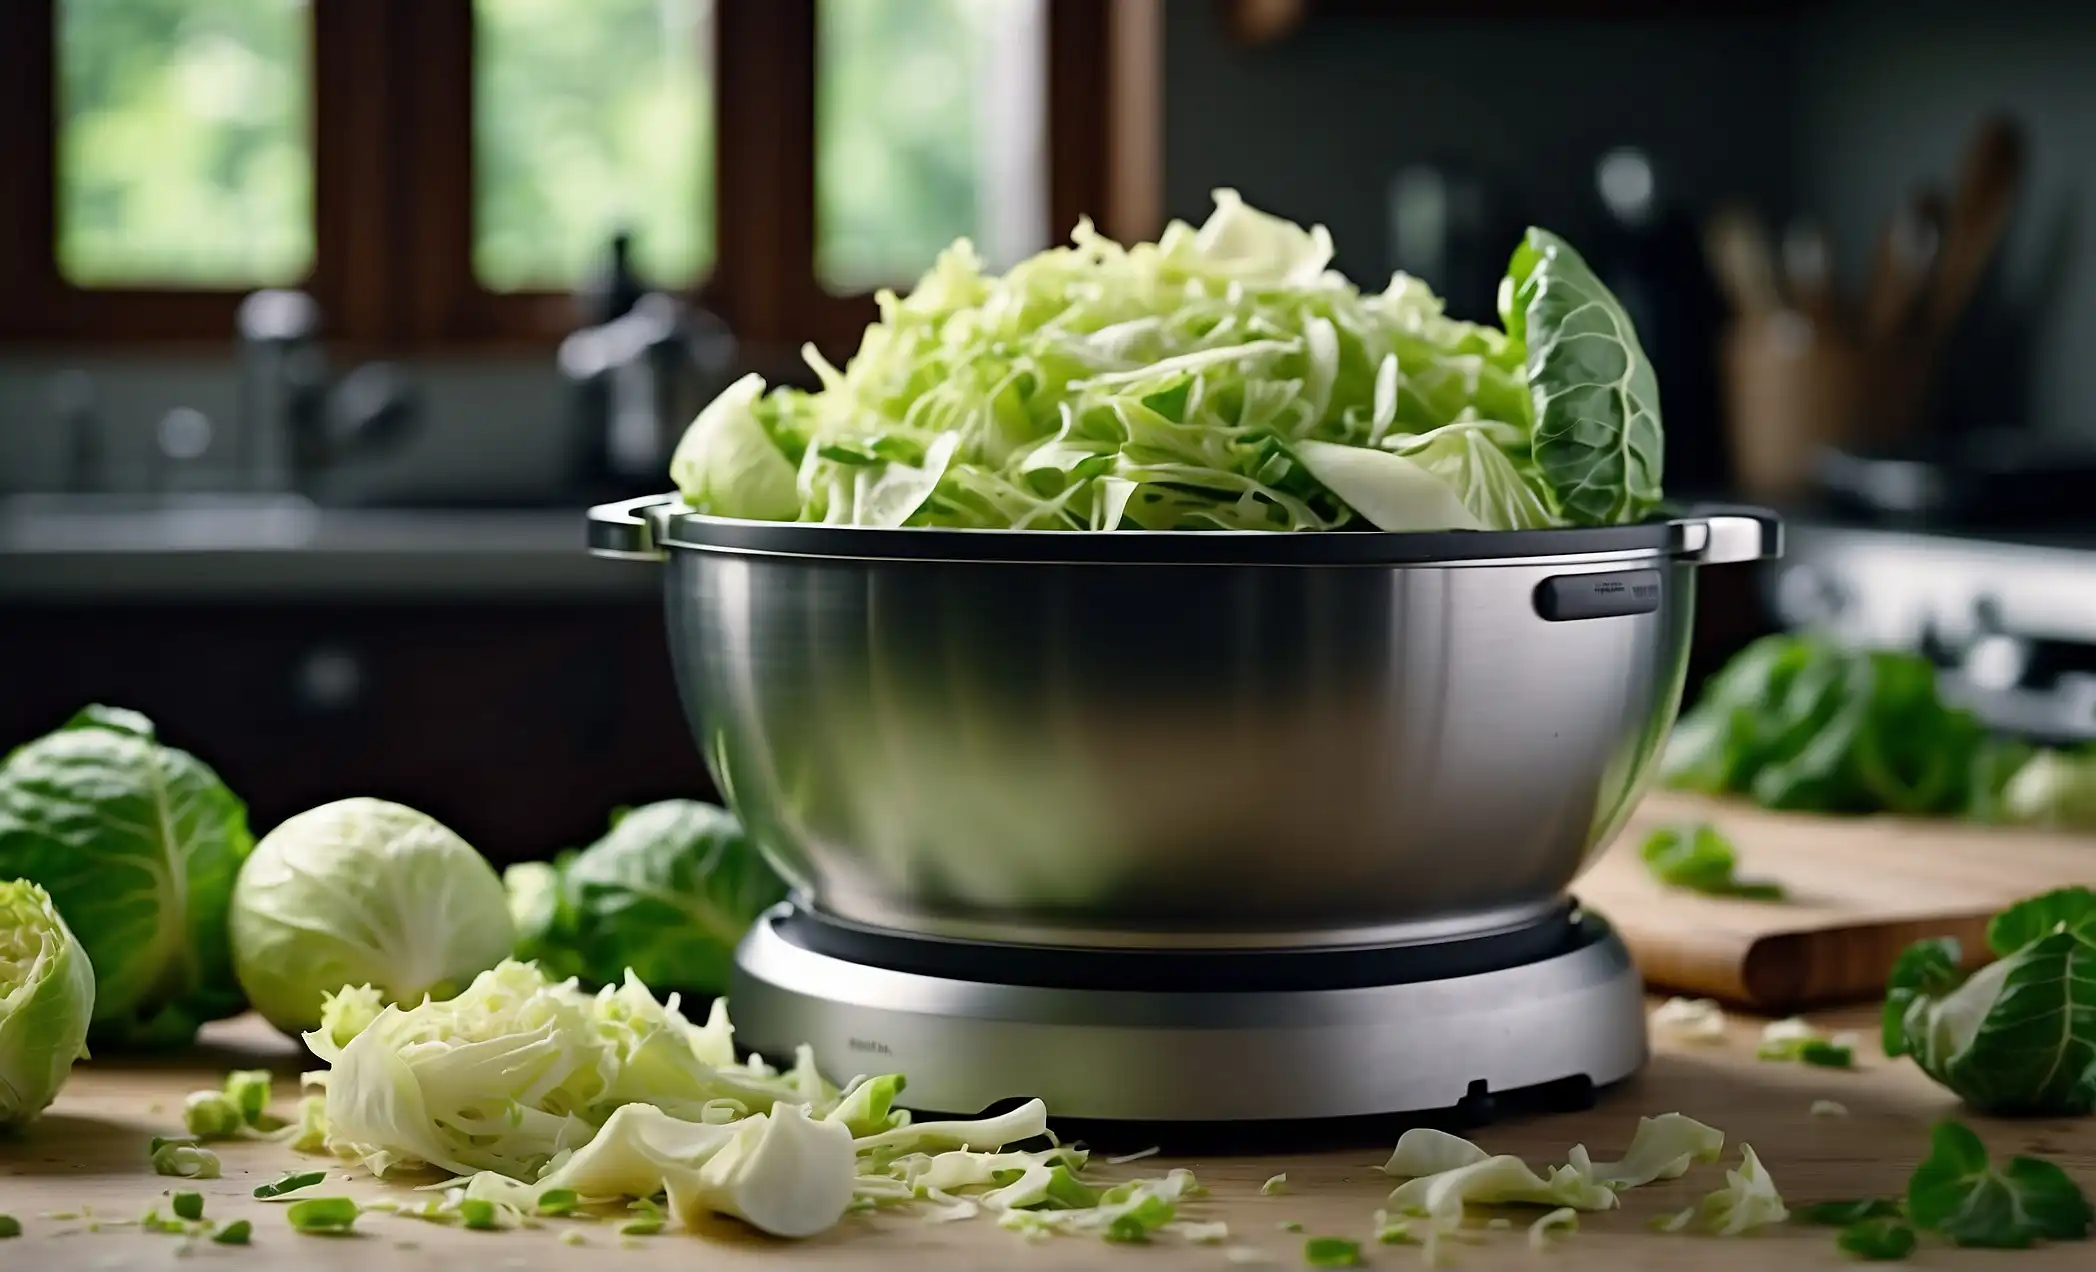 How to Shred Cabbage in Food Processor